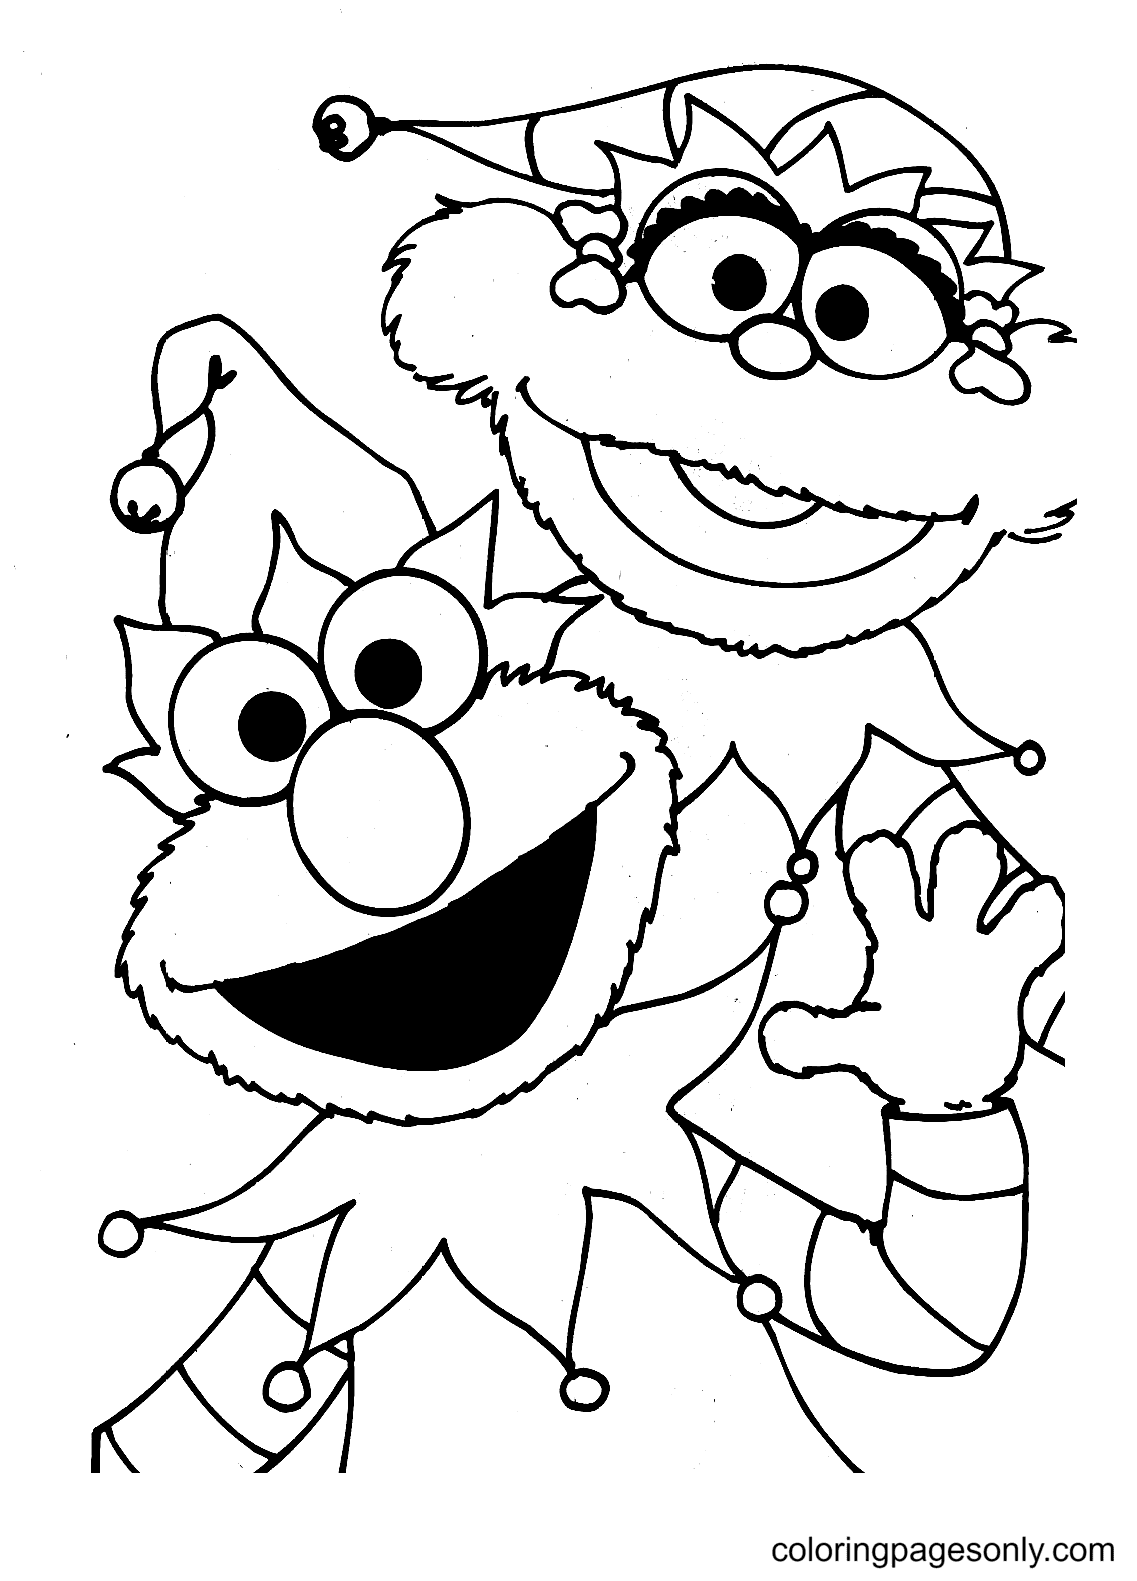 Elmo and Abby Coloring Pages